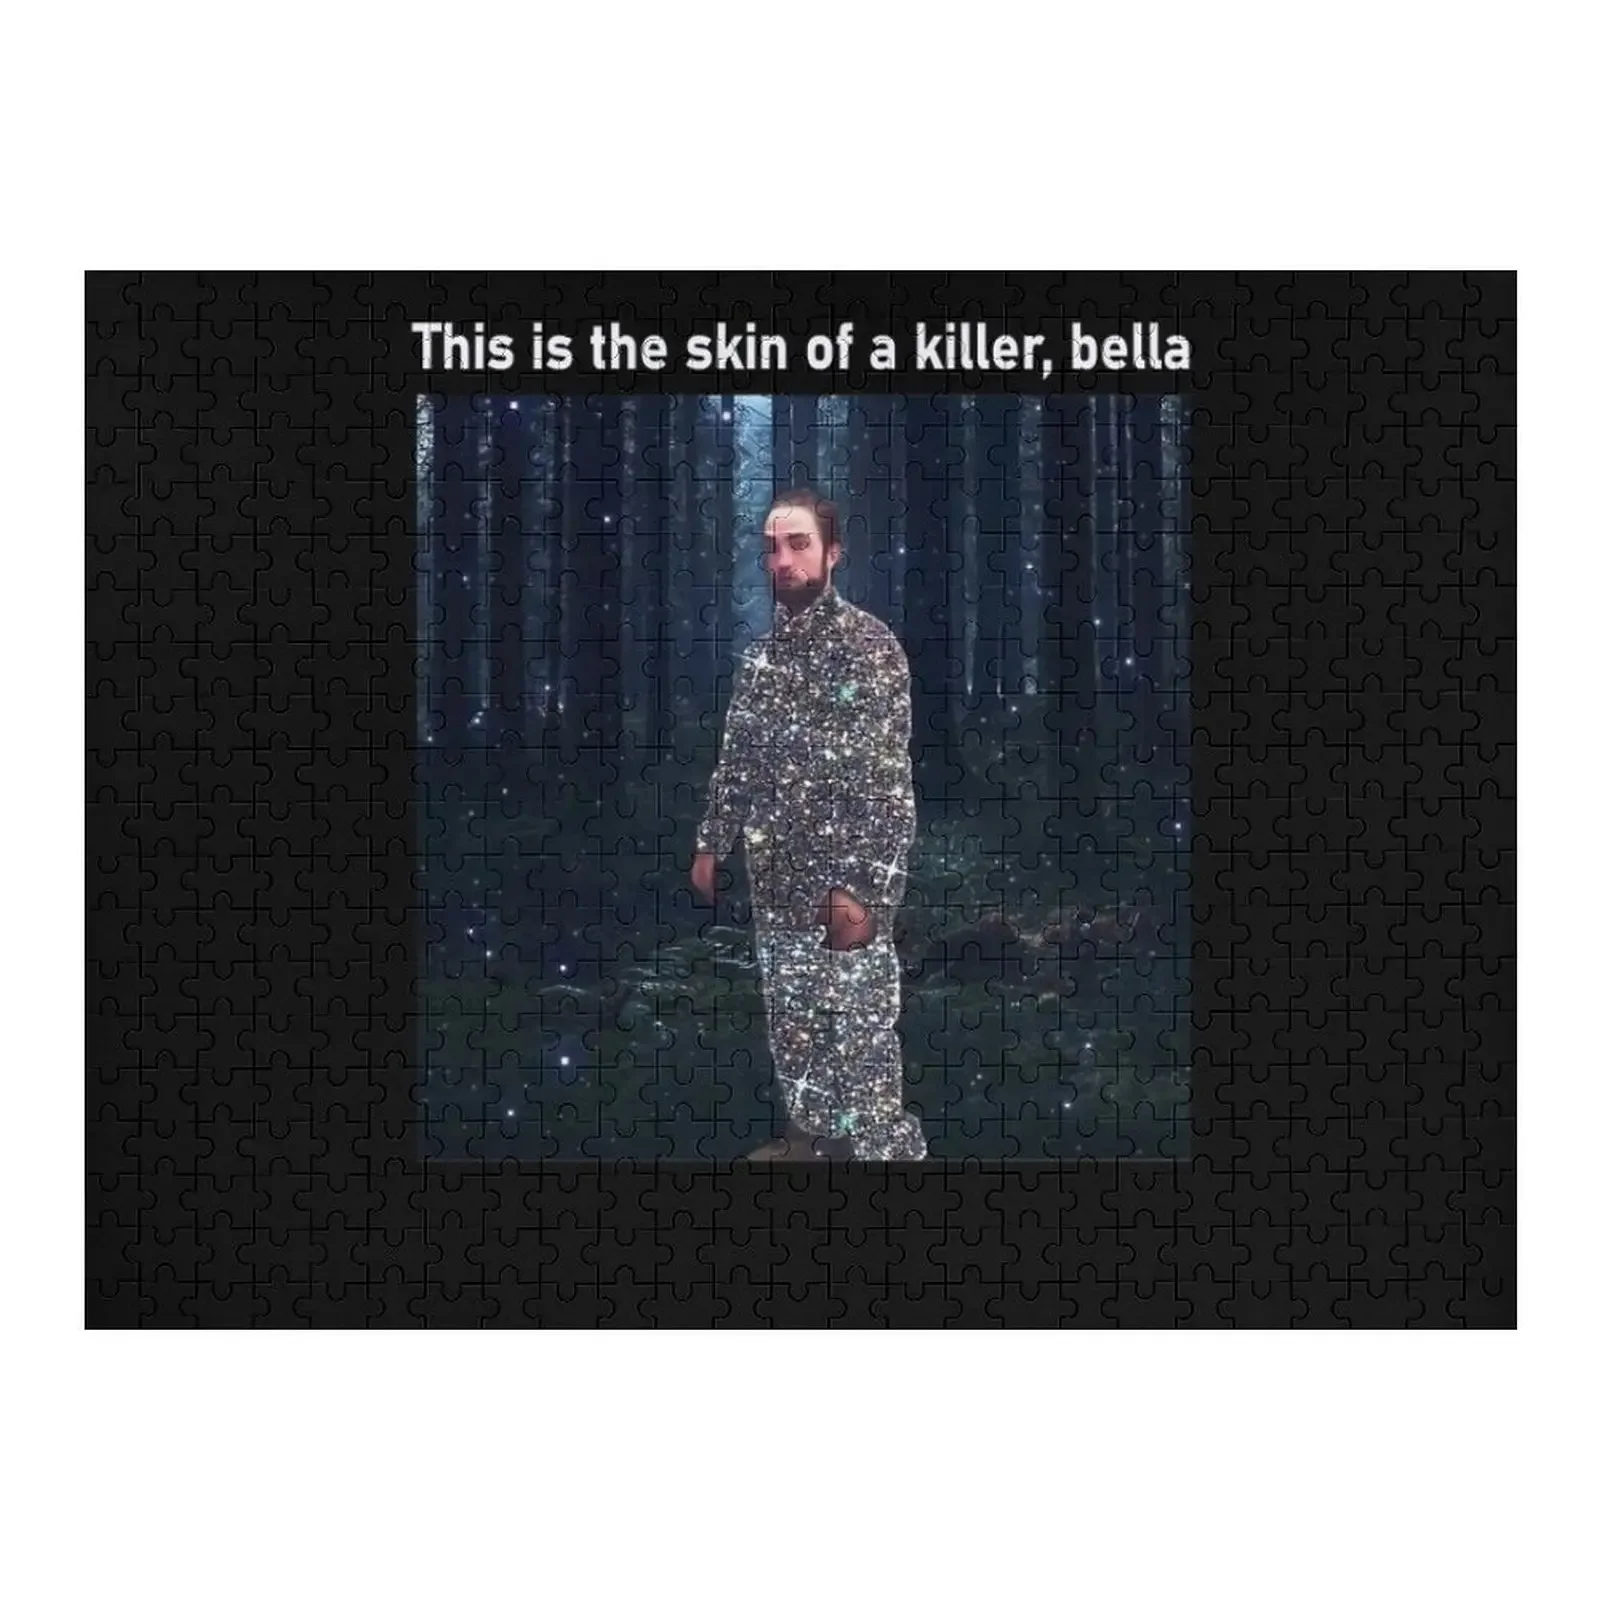 This is the skin of a killer bella Jigsaw Puzzle Wooden Animal Personalized Baby Toy Puzzle тушь killer